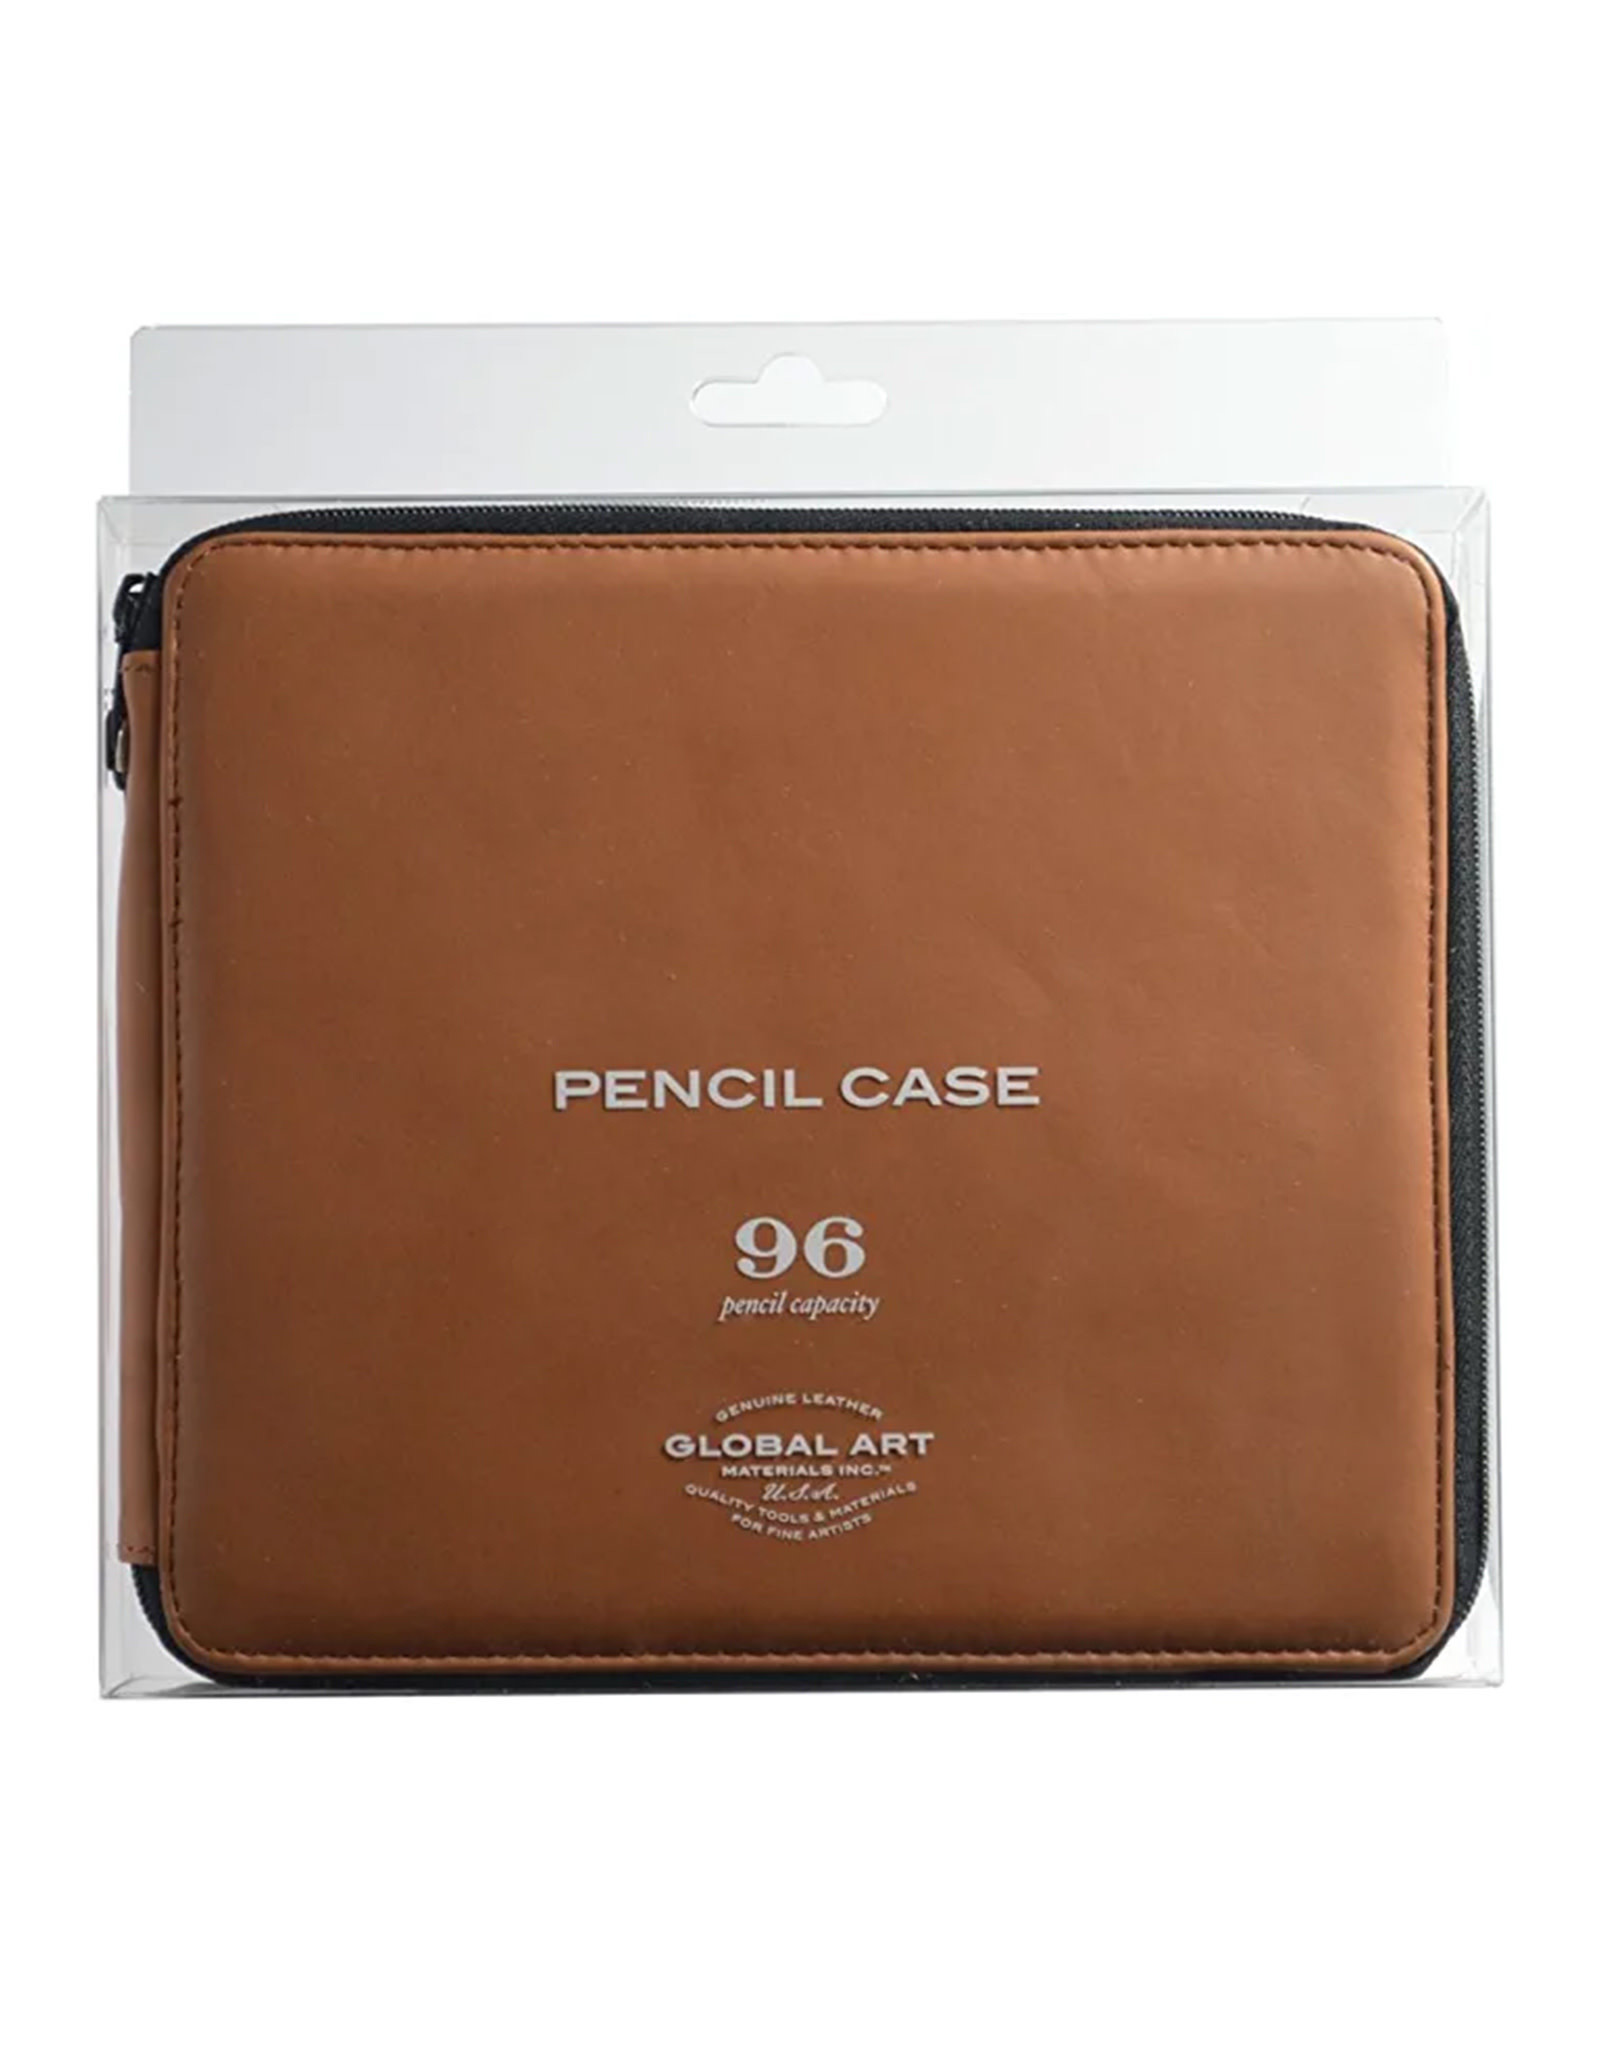 SPEEDBALL ART PRODUCTS Global Art Pencil Case, Genuine Leather, Brown, 96 Pencils